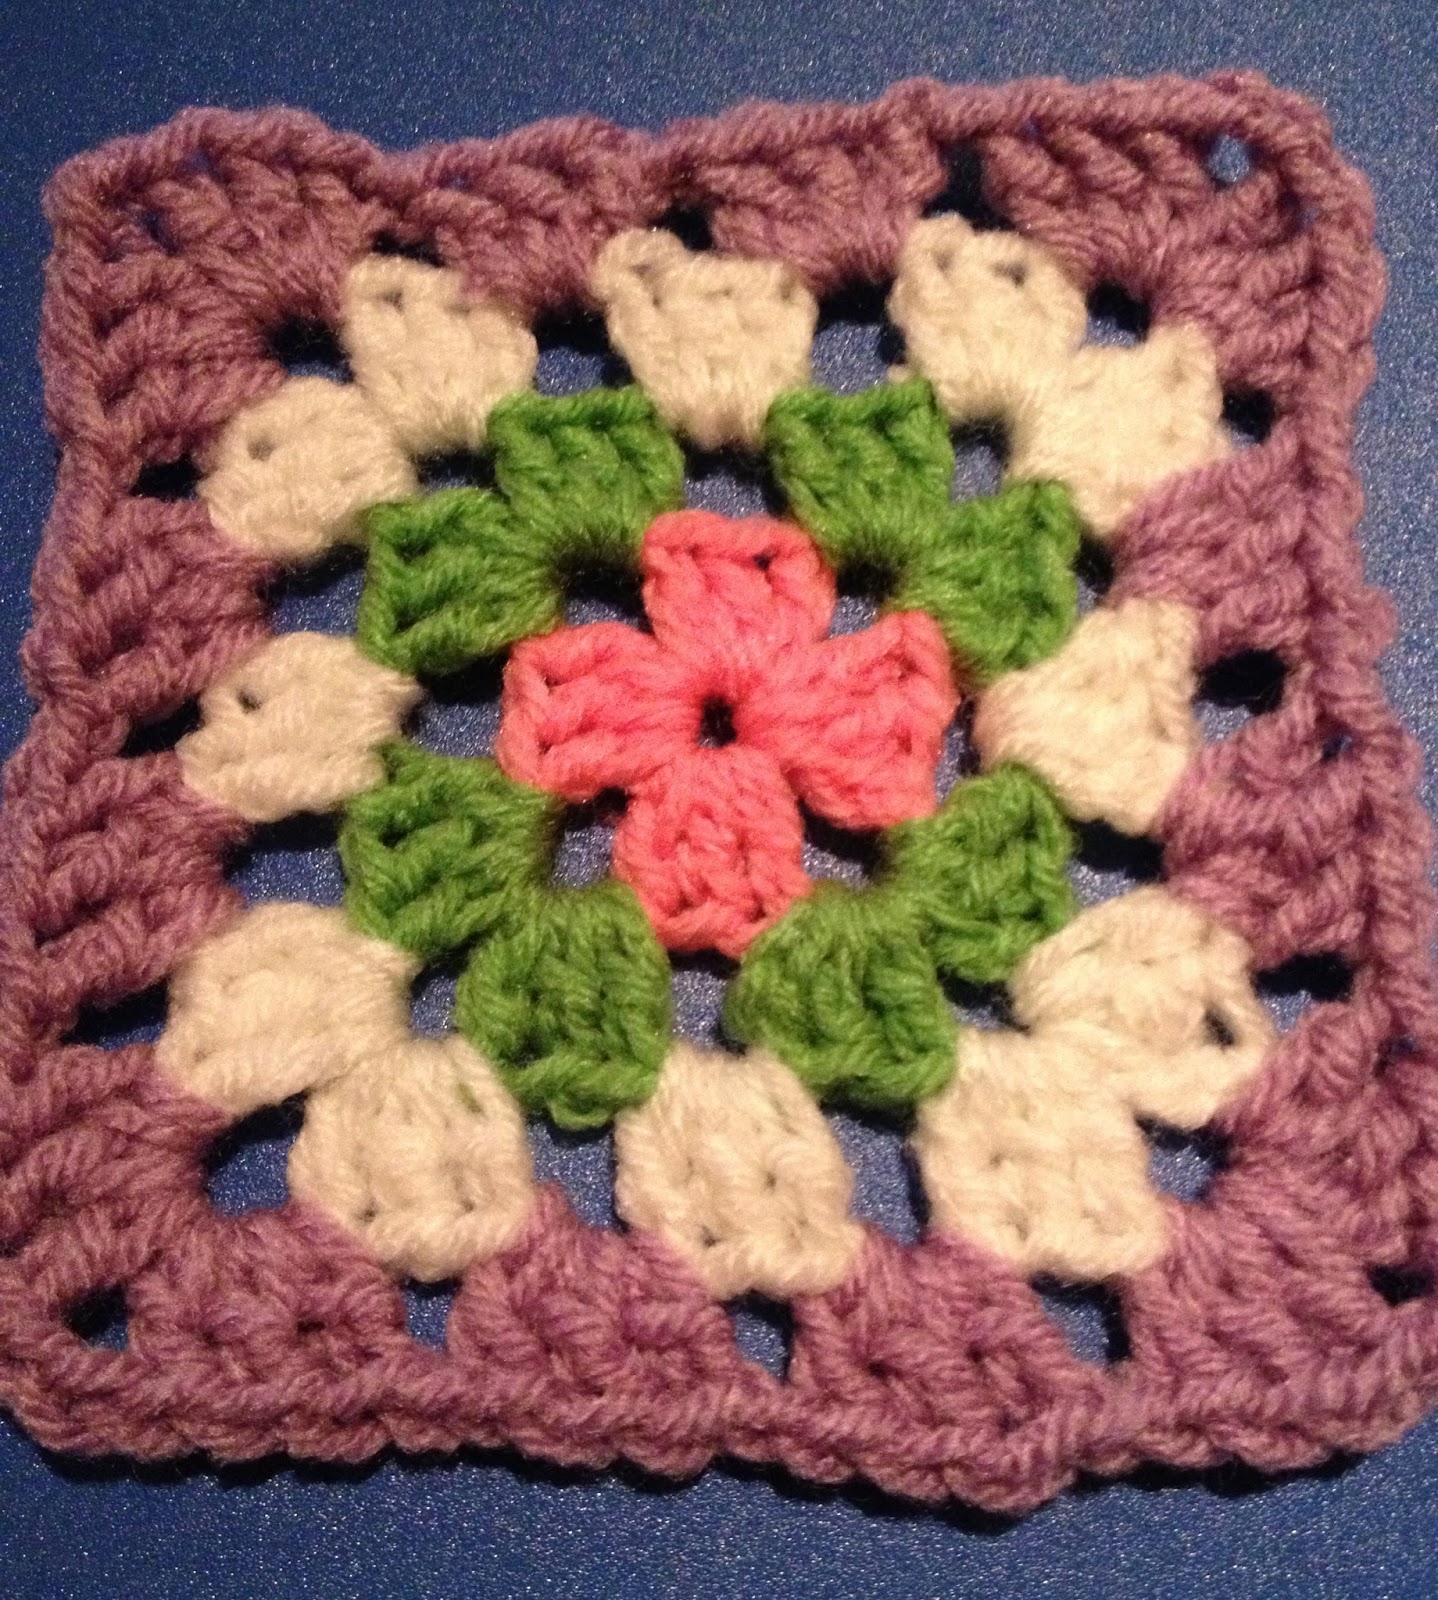 Free Crochet Connection: Basic Granny Square Pattern (for the beginner)